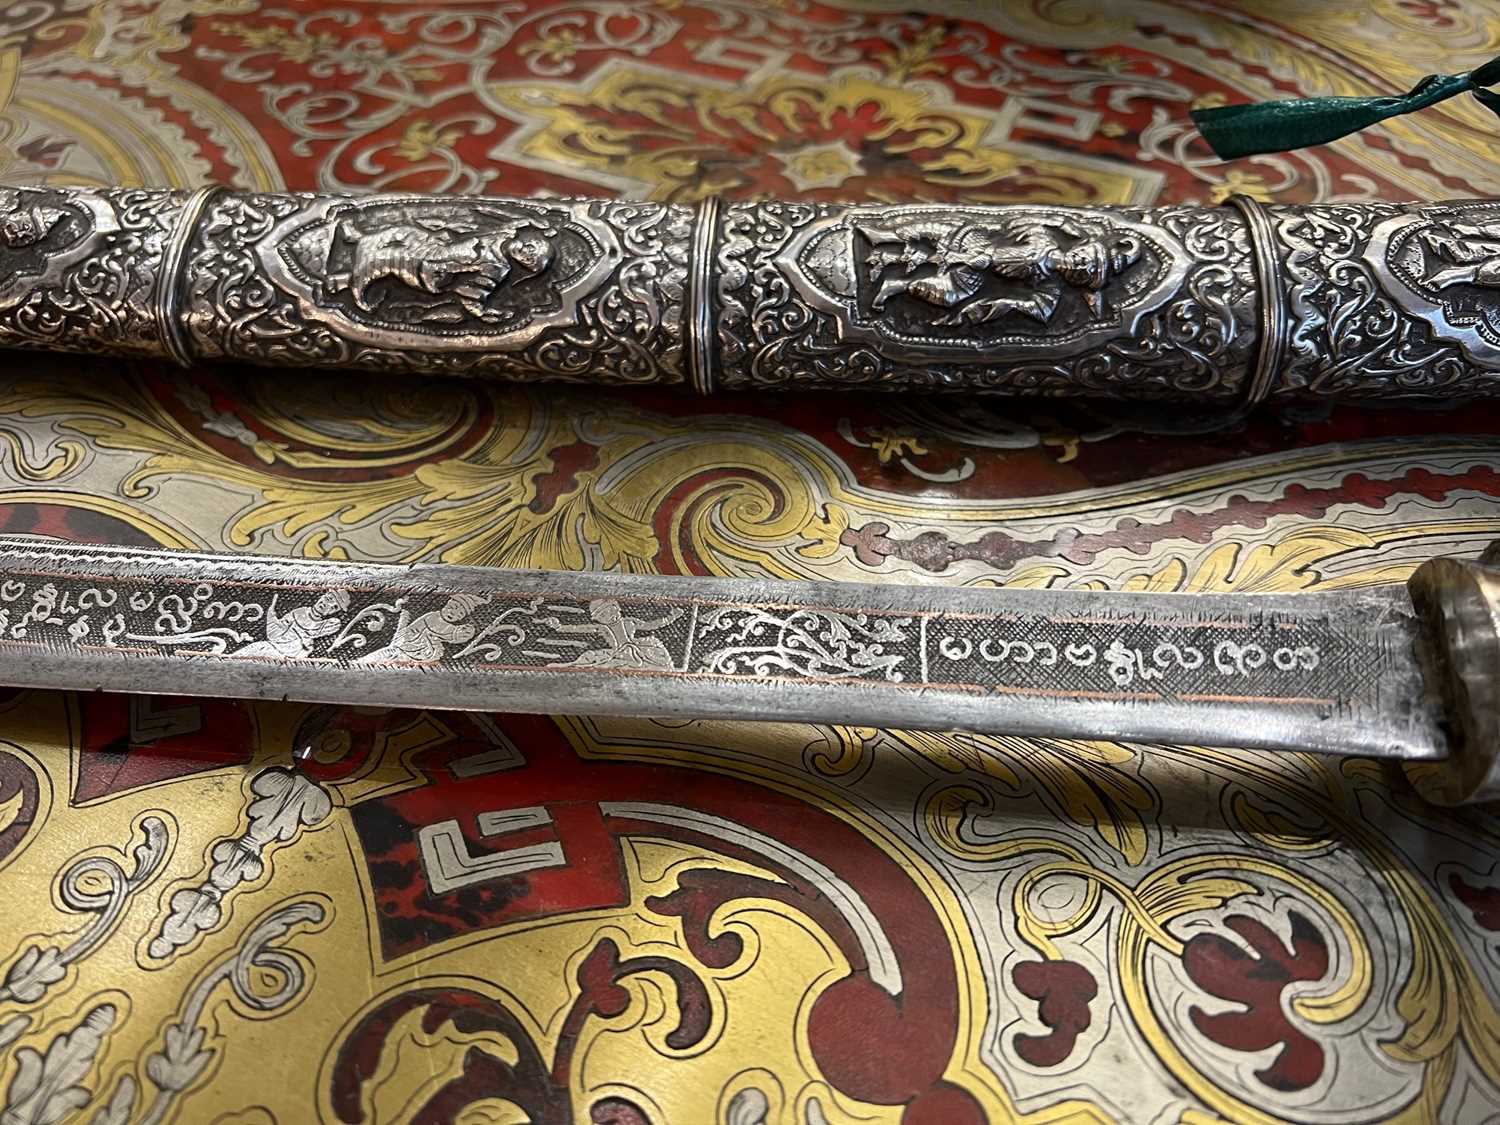 A BURMESE SILVER MOUNTED PRESENTATION SWORD (DHA), LATE 19TH / 20TH CENTURY - Image 11 of 12